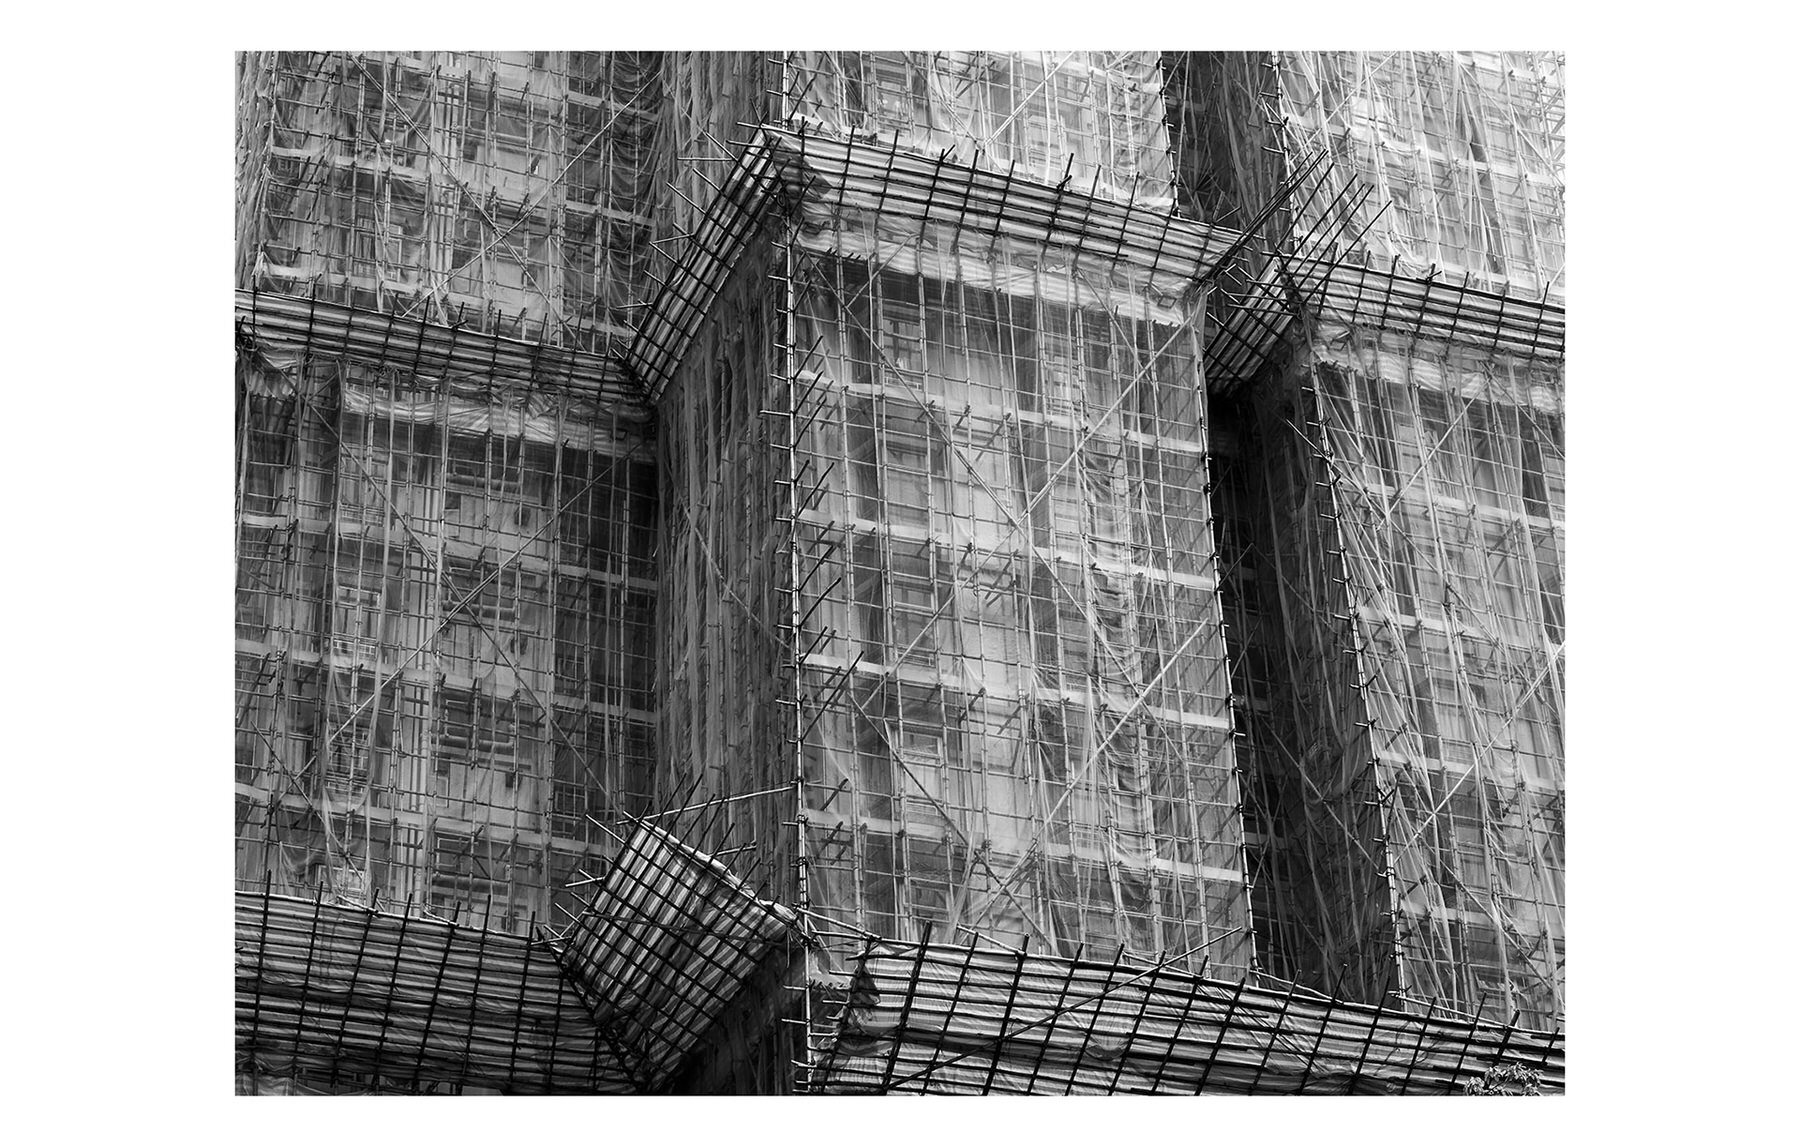  The Horse Latitudes  Construction.  Hong Kong      Detail of bamboo scaffold which covers some of the most modern buildings in Hong Kong,   Traditional methods    